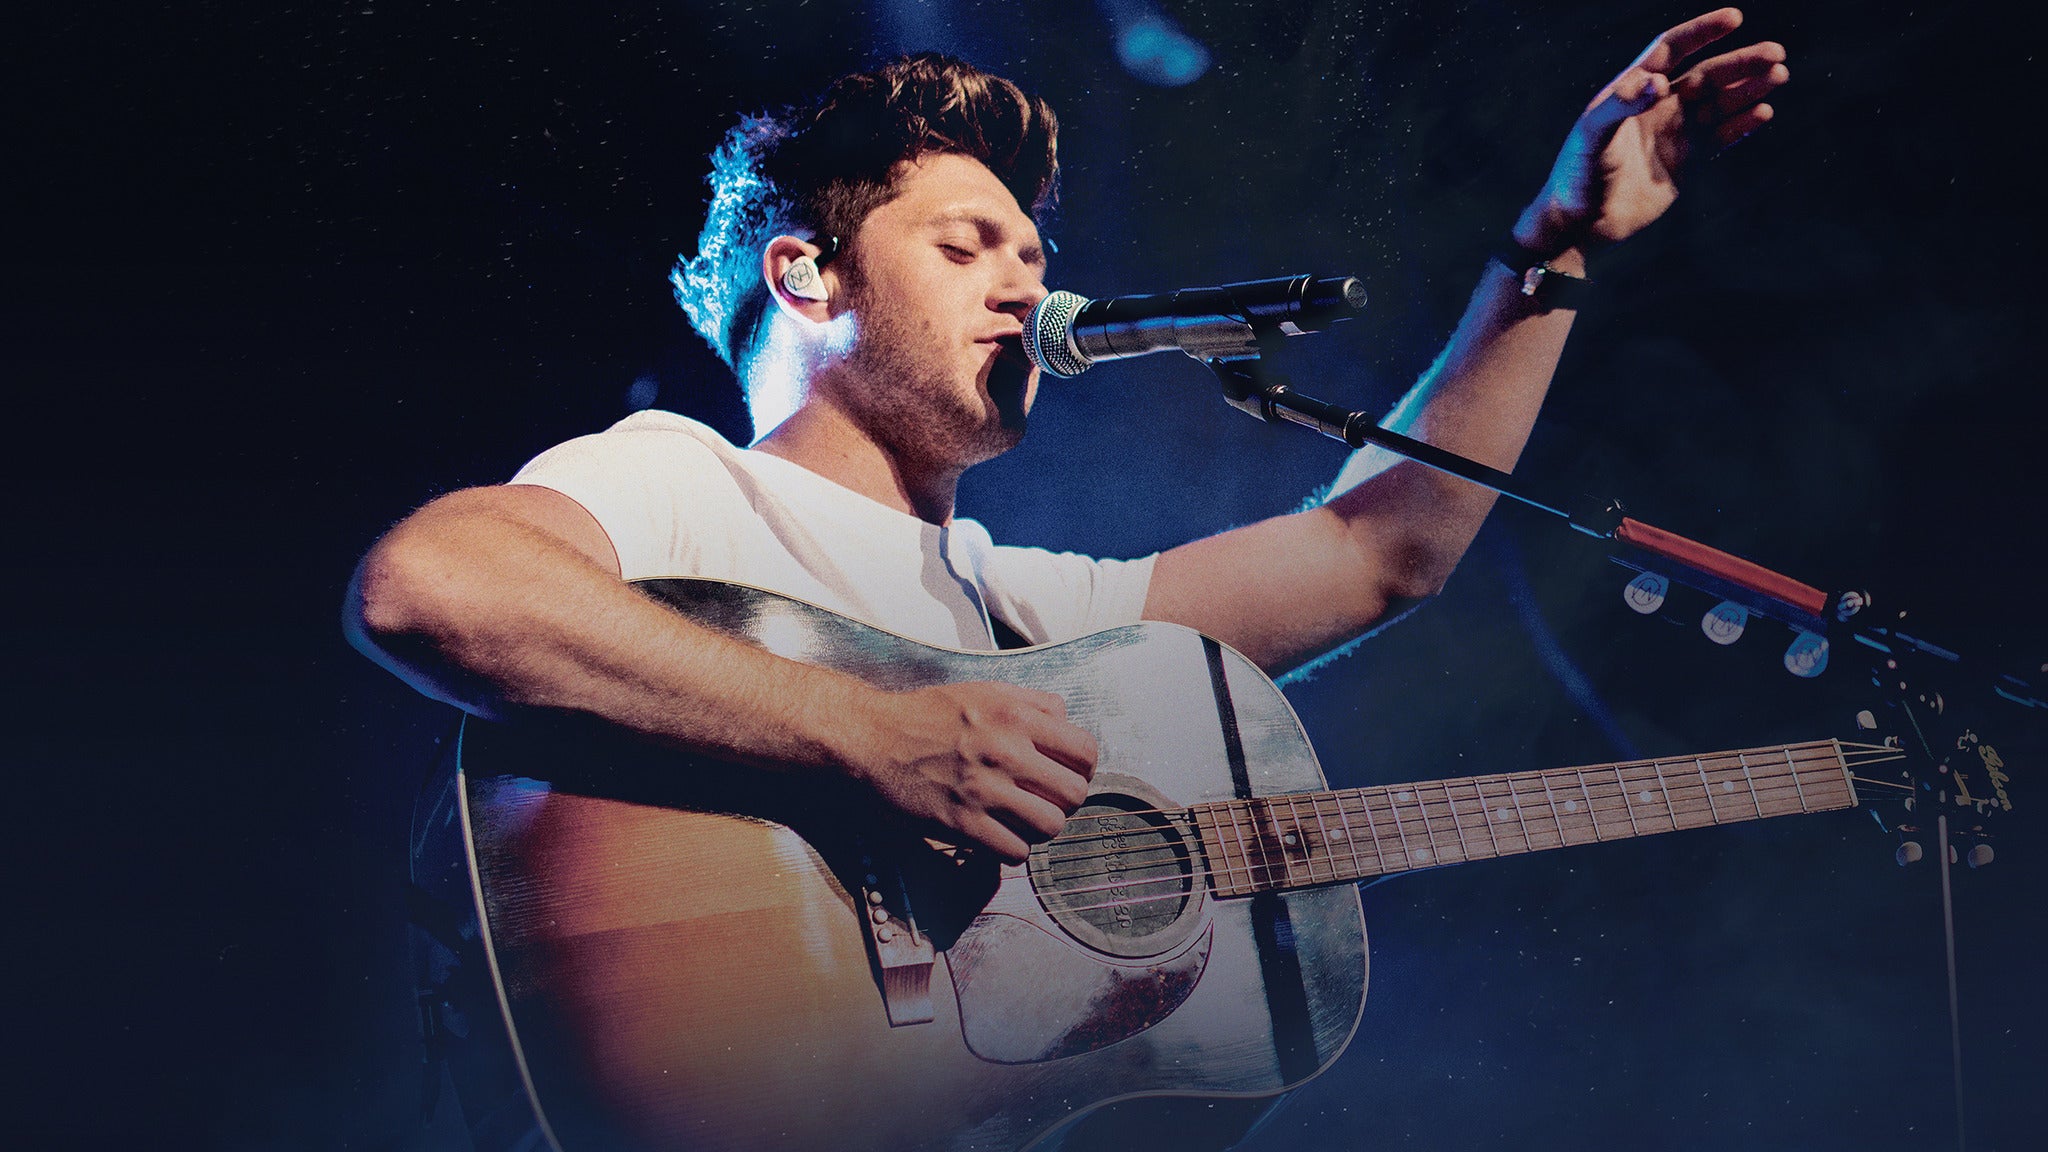 Honda Civic Tour presents Niall Horan, Nice To Meet Ya in West Valley City promo photo for Live Nation presale offer code